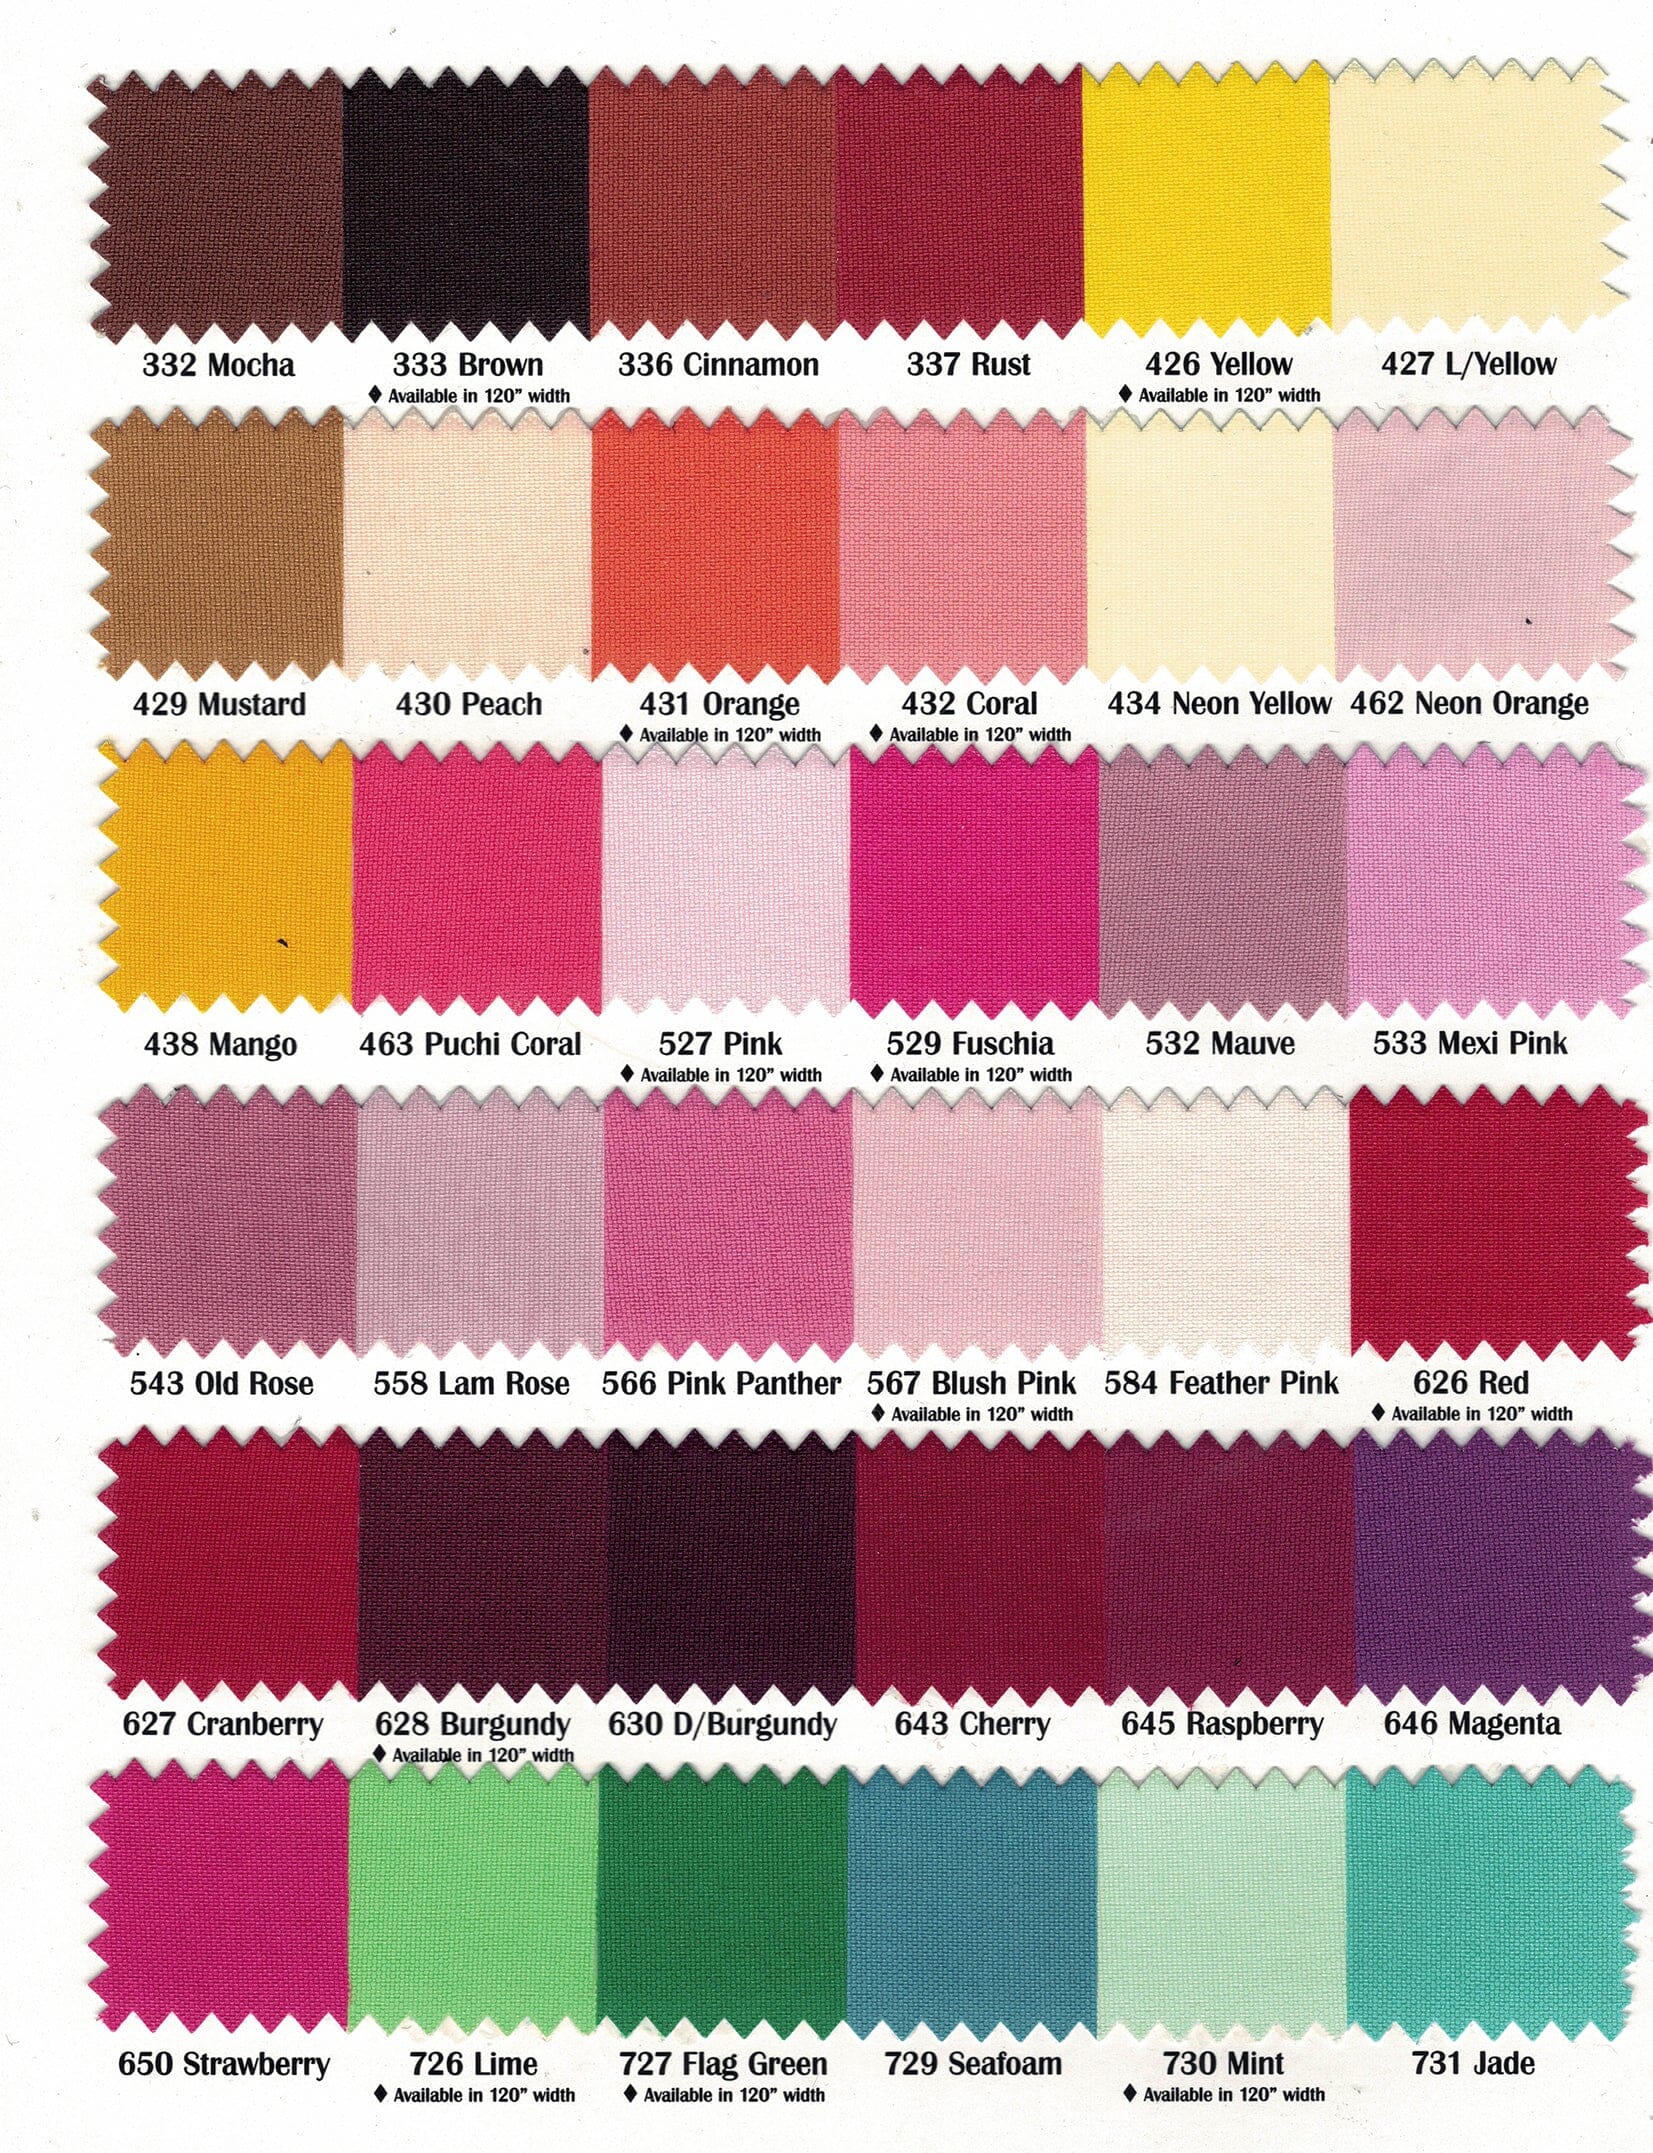 Fabric Swatches Samples, Tremendous Variety & Options